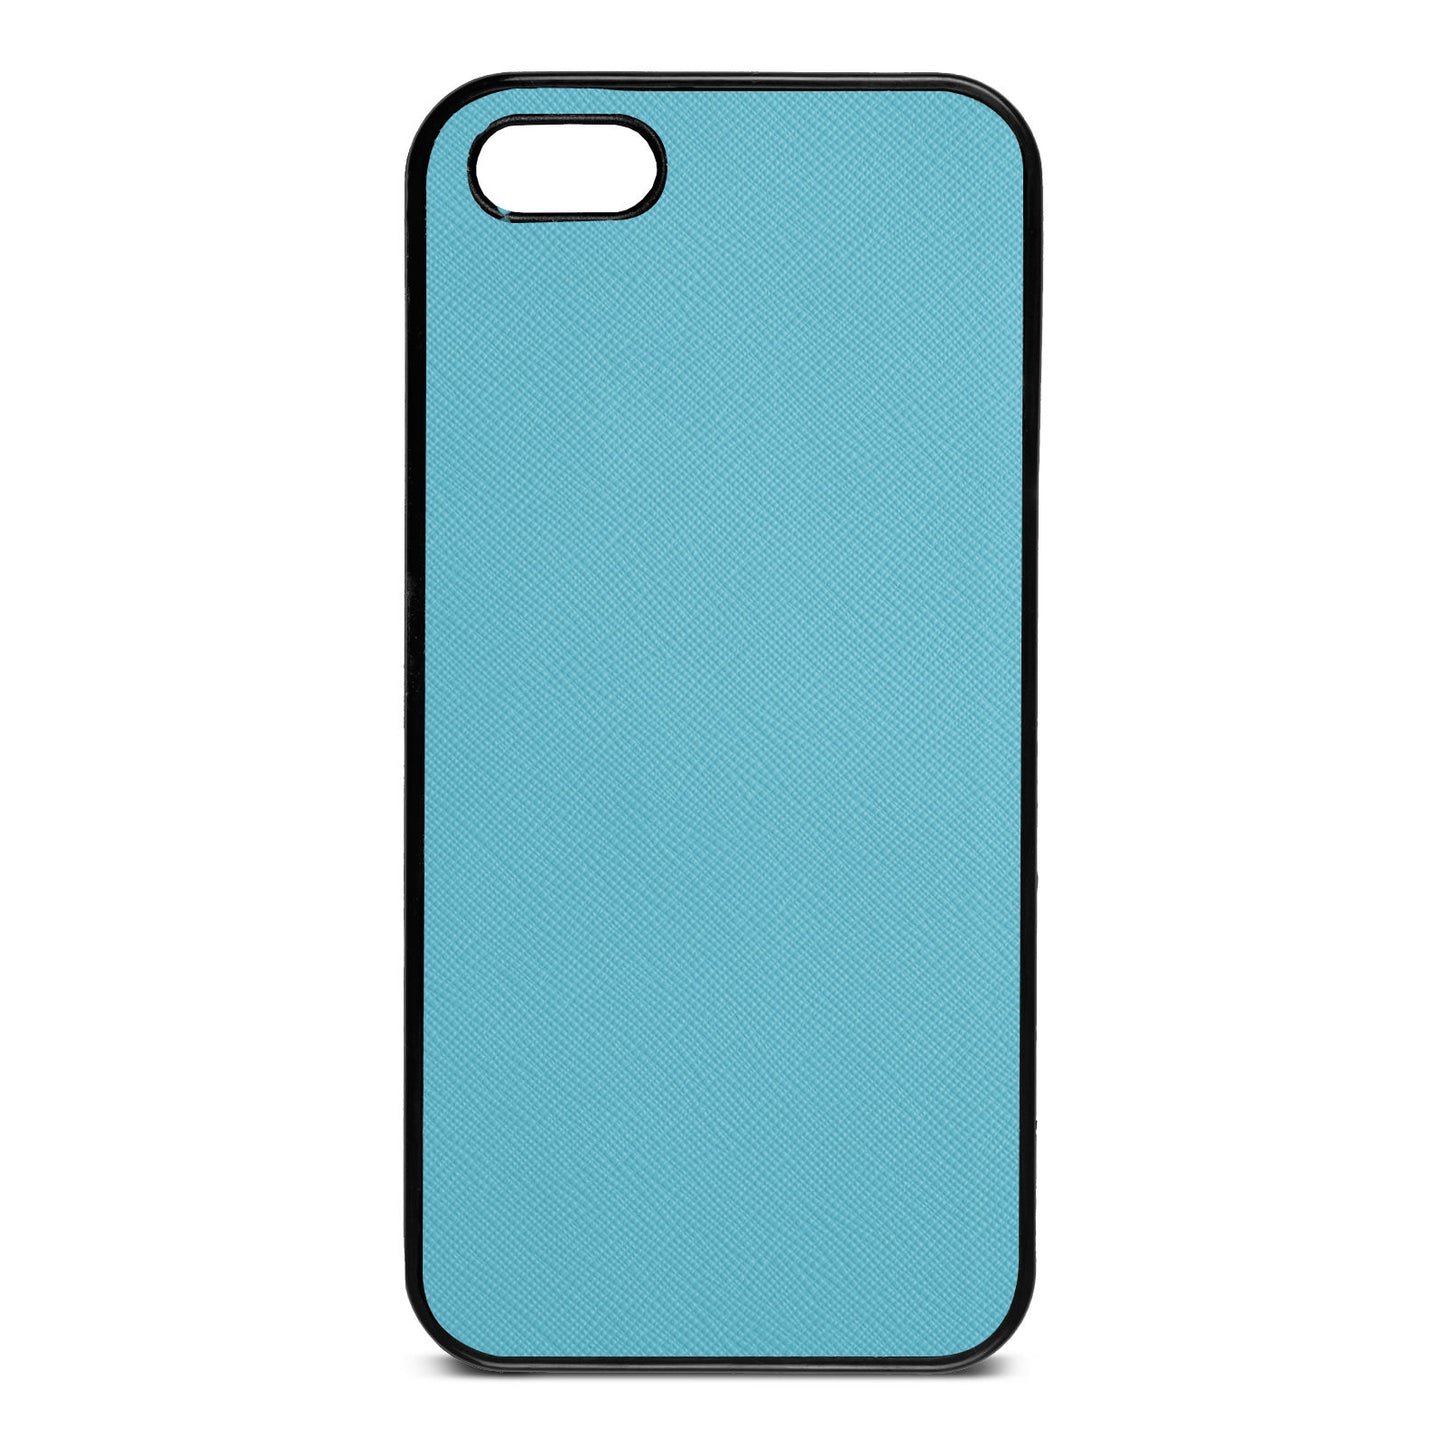 Blank Personalised Sky Blue Saffiano Leather iPhone 5 Case